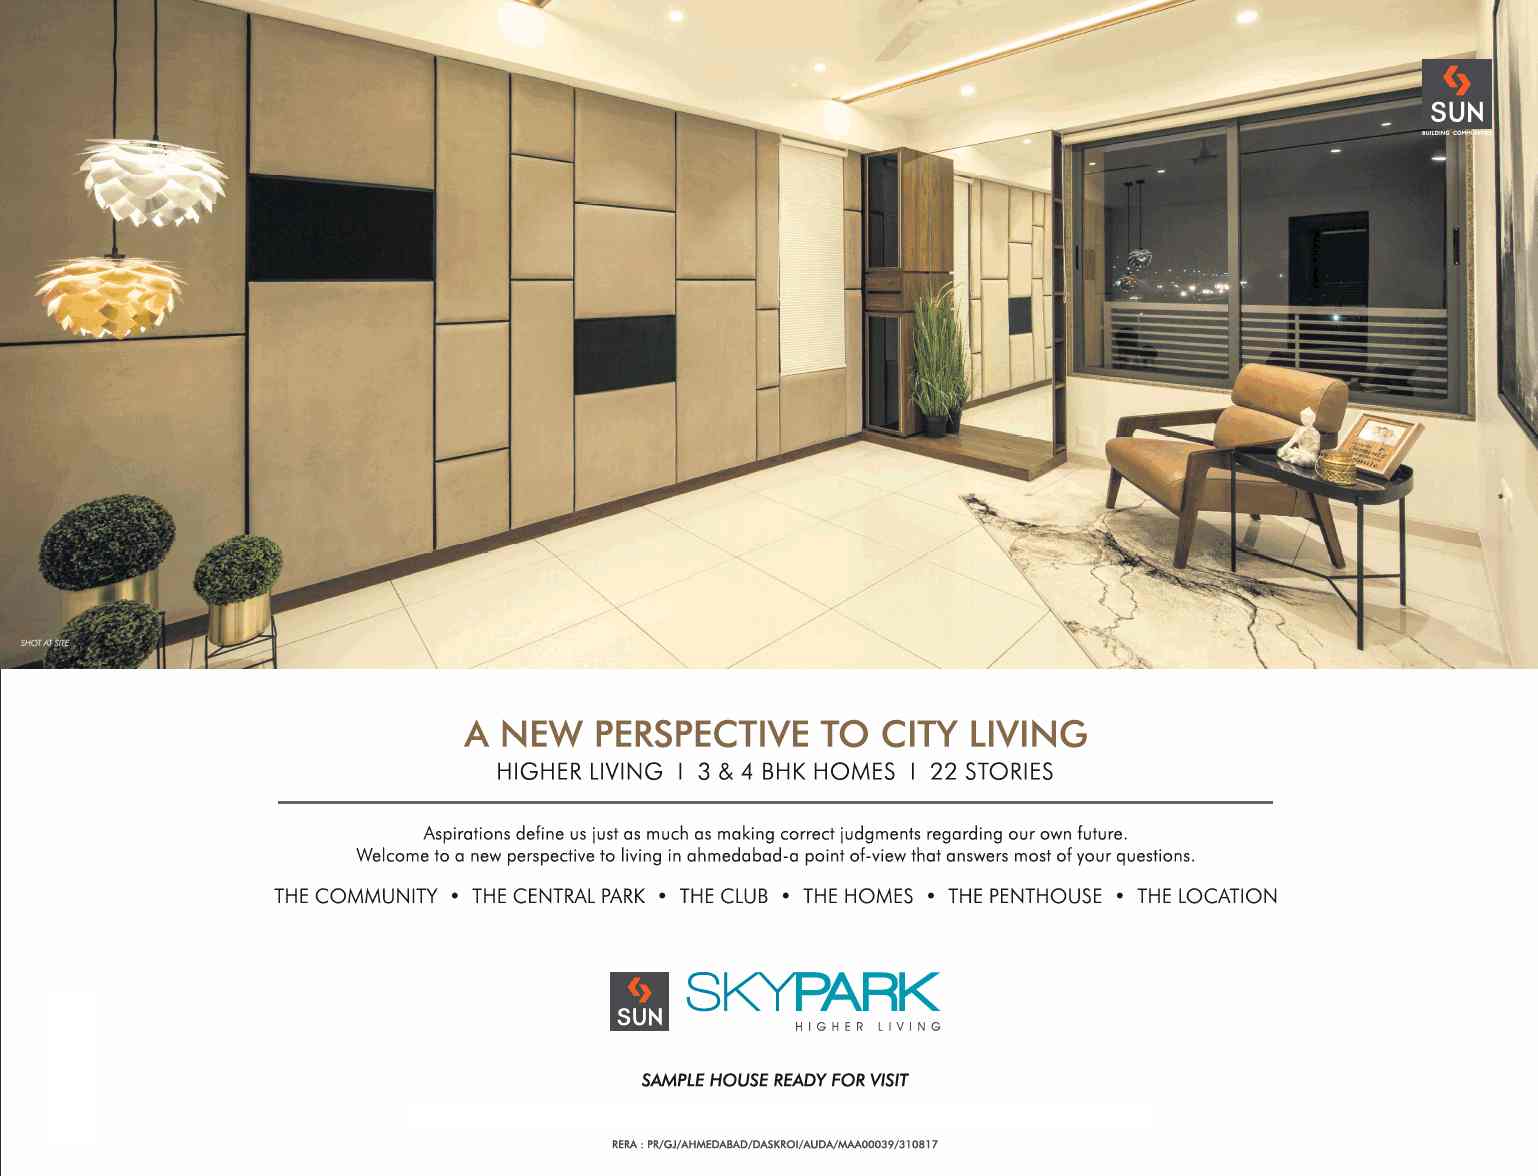 Sample house ready for visit at Sun Sky Park in Ahmedabad